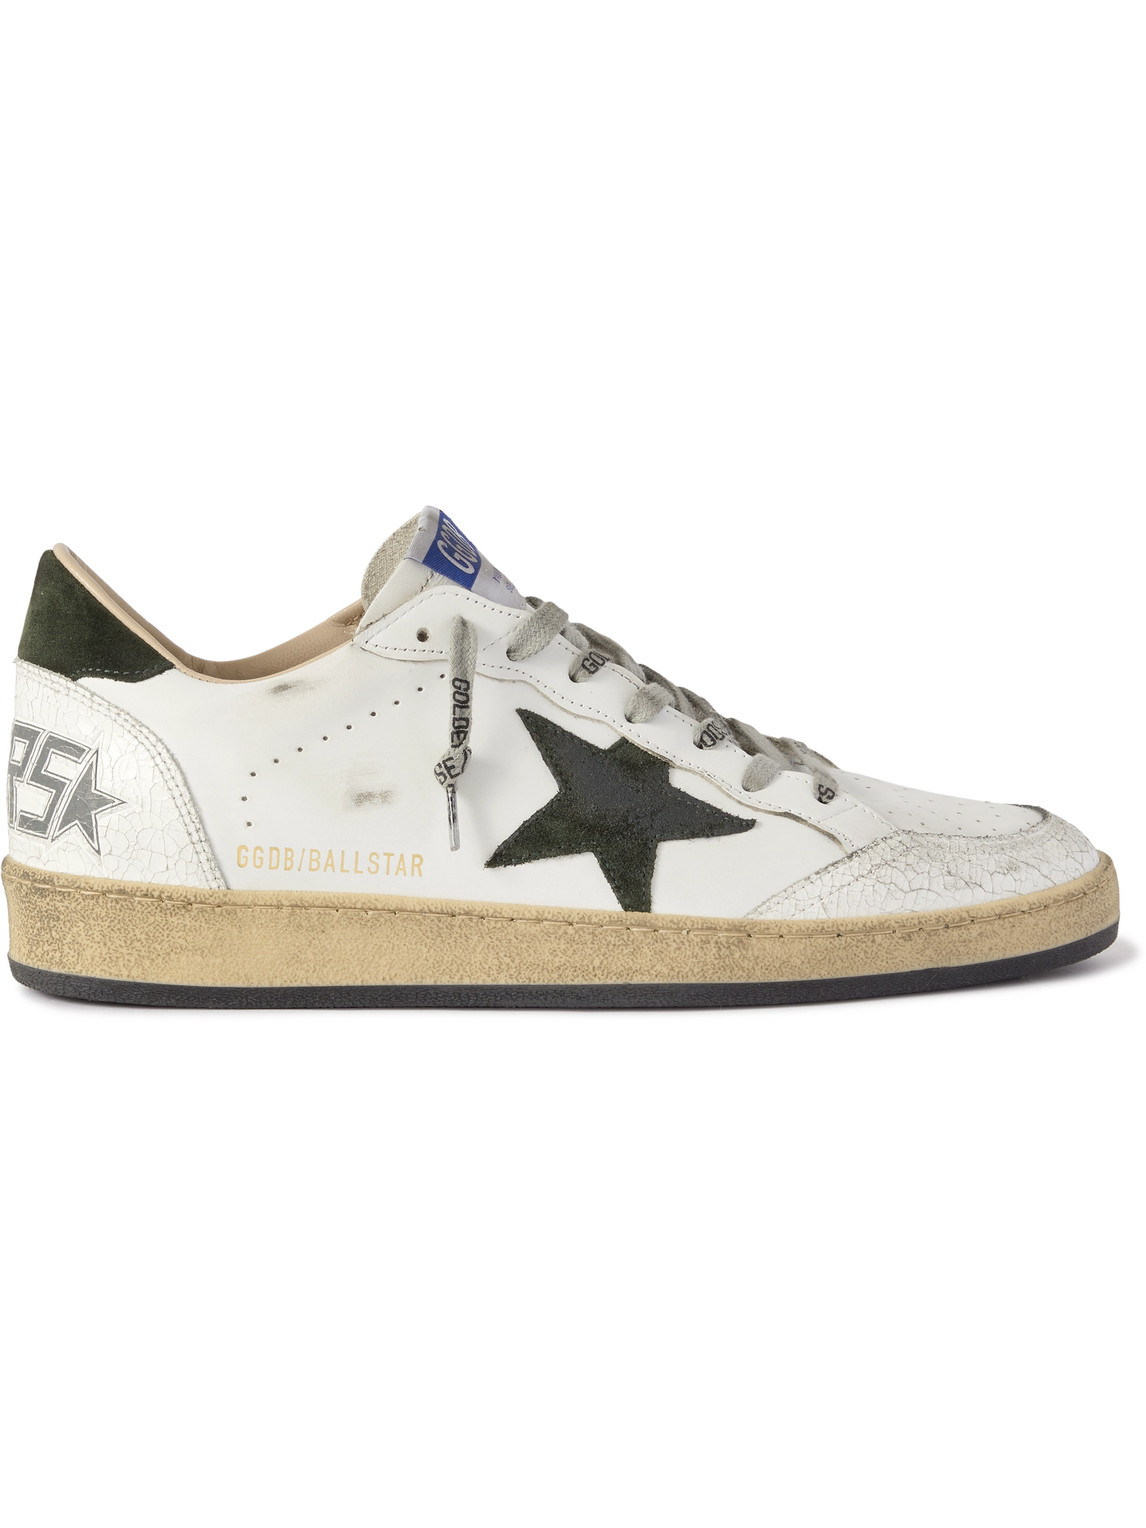 GOLDEN GOOSE BALLSTAR DISTRESSED LEATHER AND SUEDE SNEAKERS